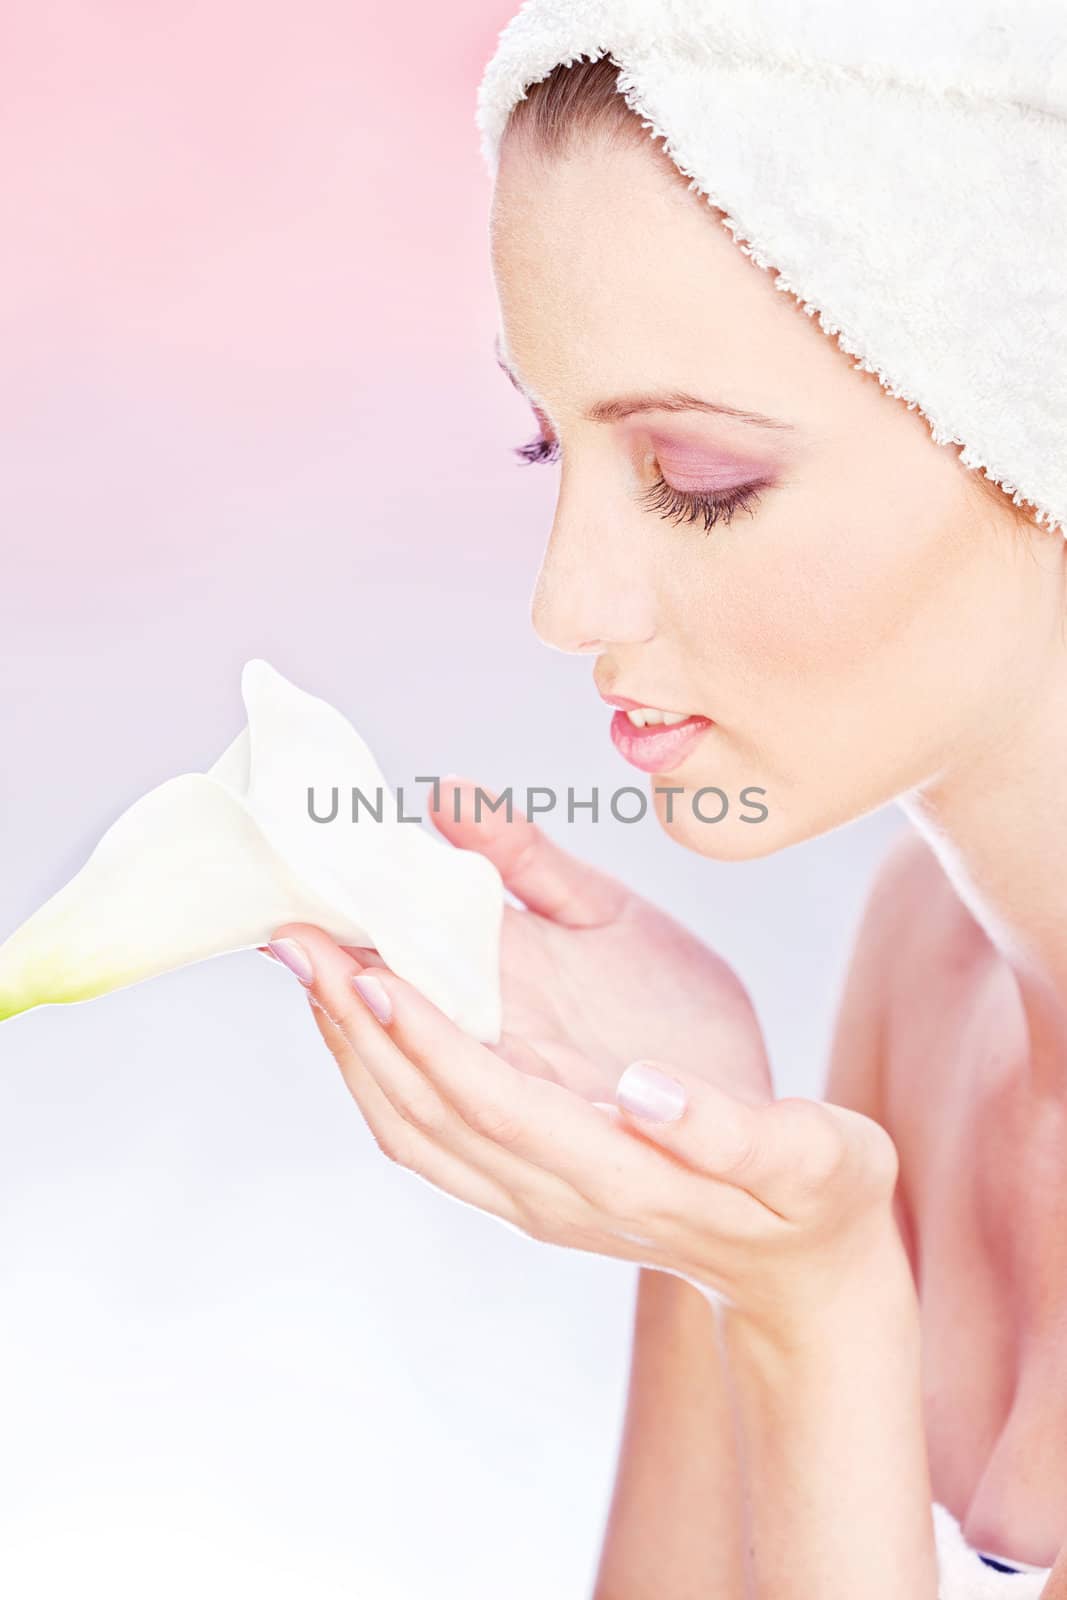 pretty woman with towel gently holding a white flower by imarin